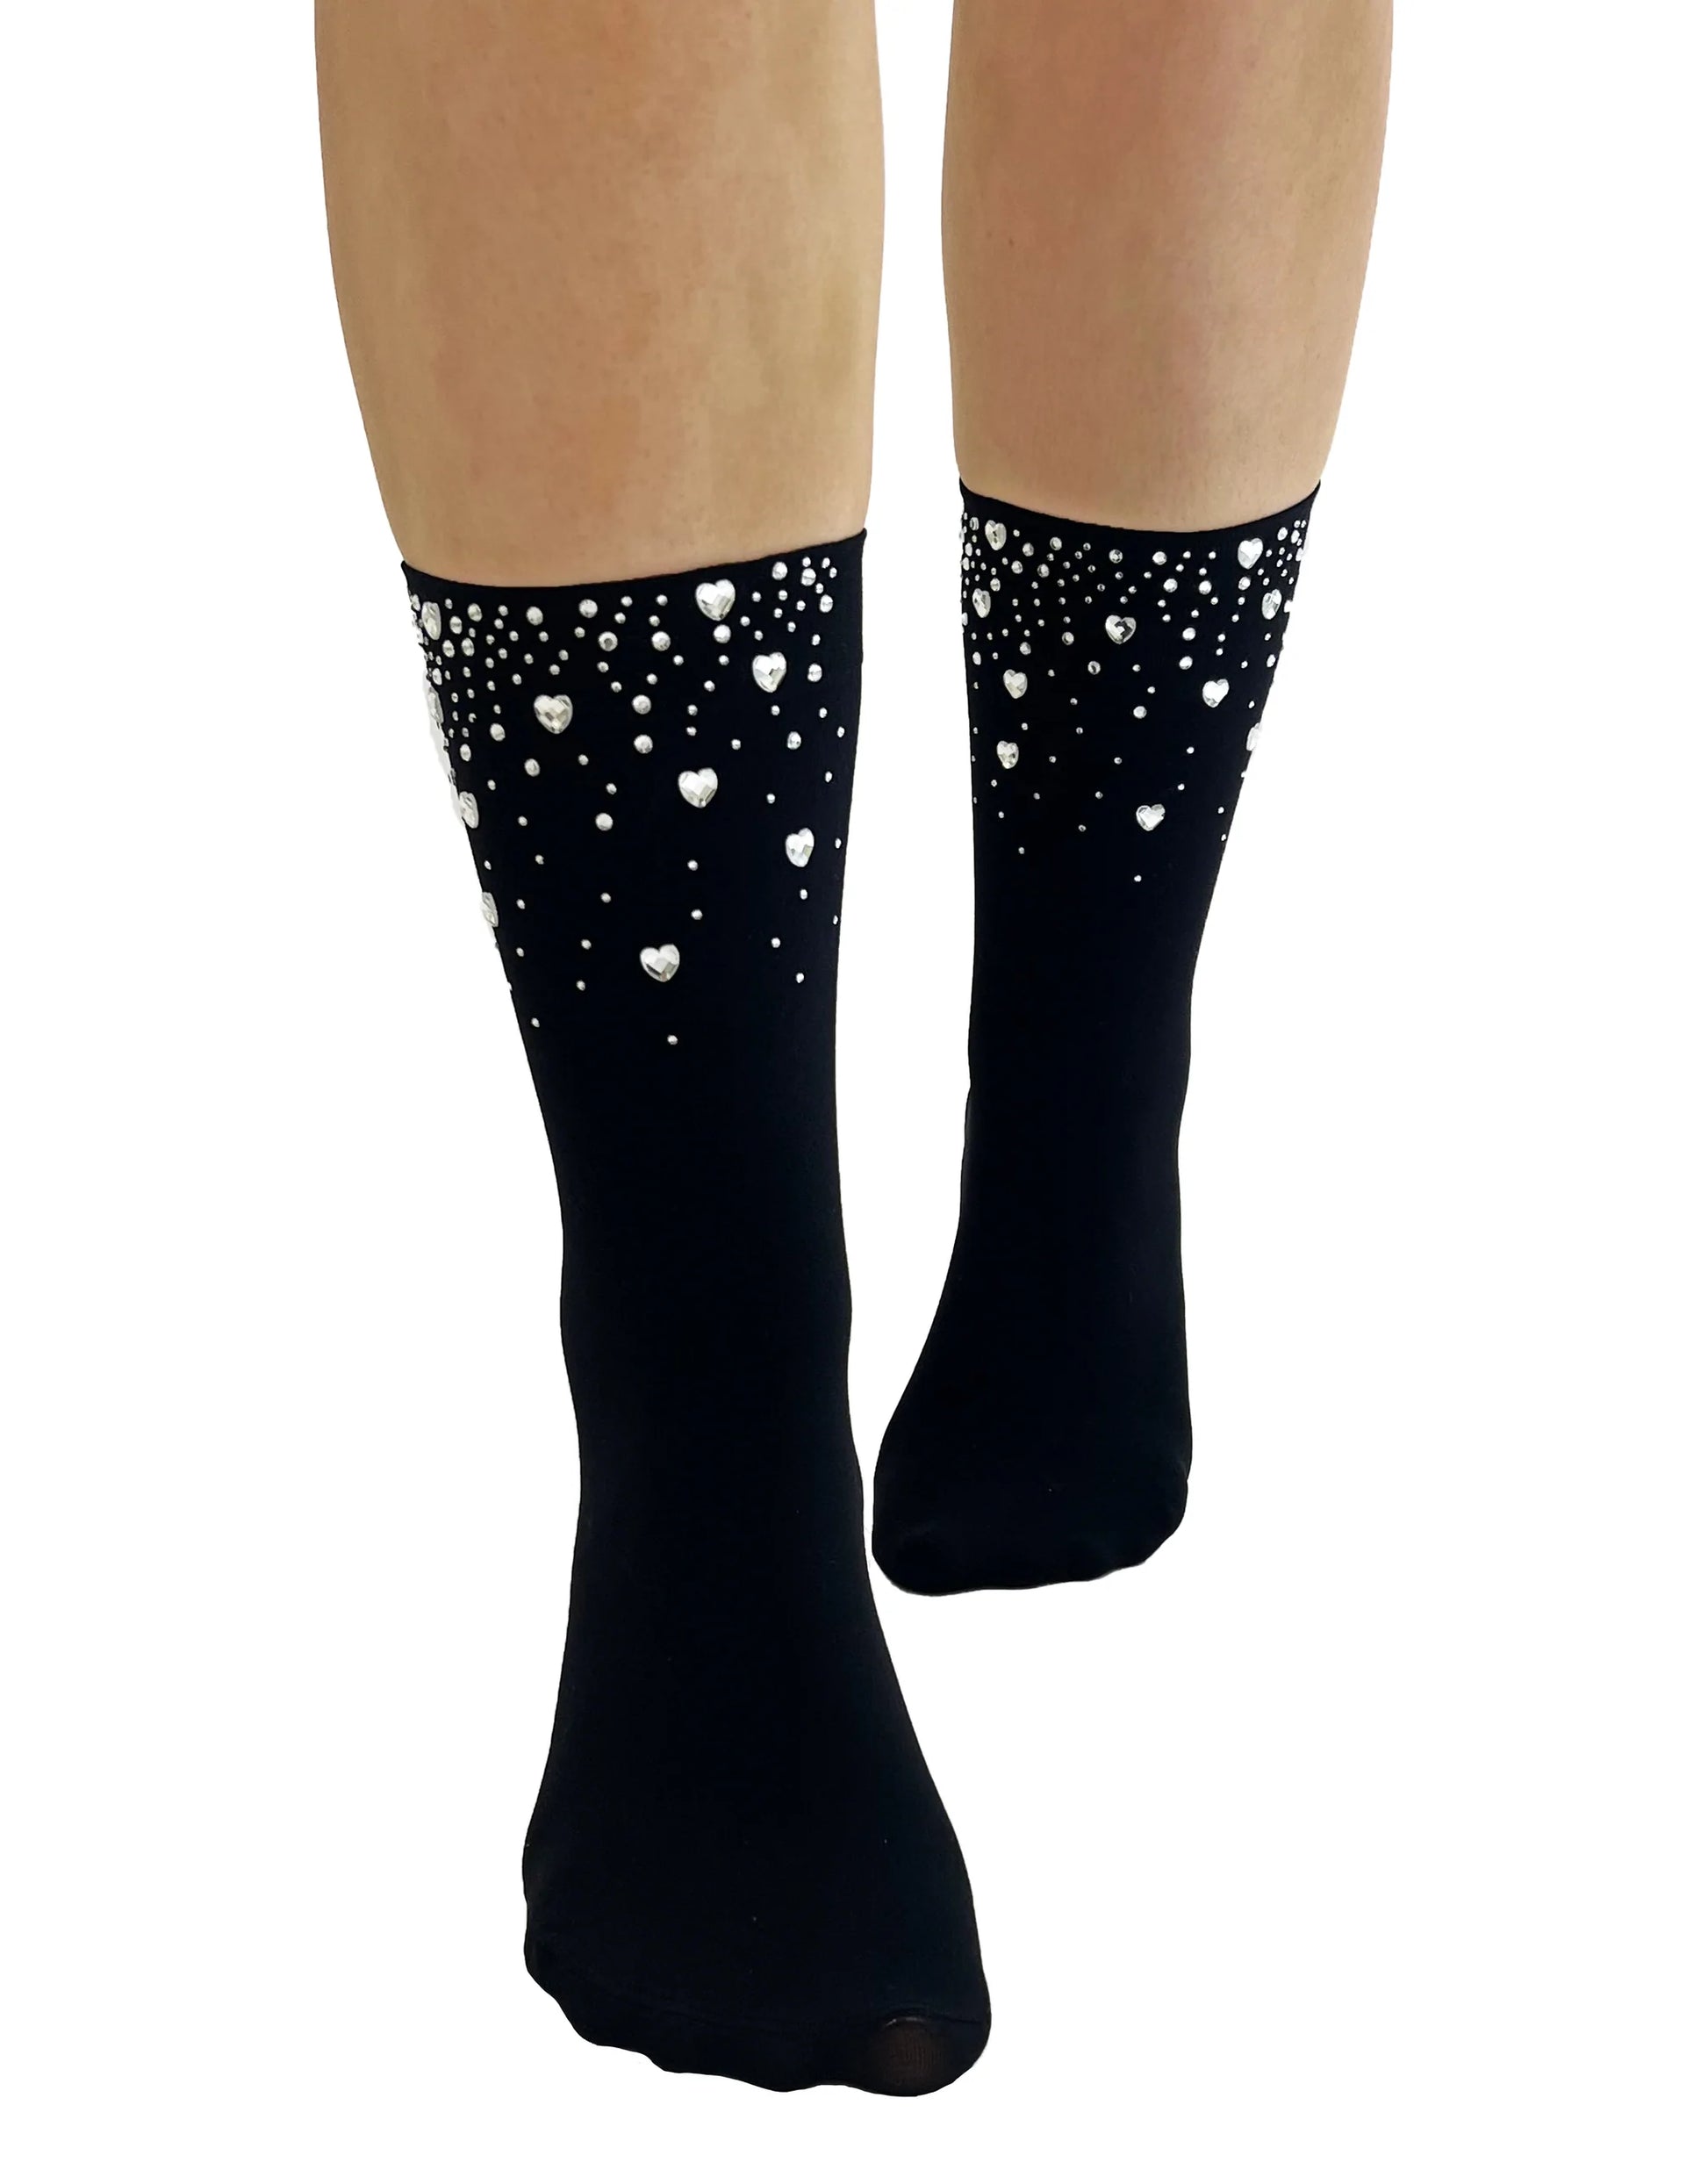 Pamela Mann Embellished Diamantí© Heart Socks - Black opaque fashion ankle socks with sparkly round and heart shaped rhinestone dotted on the front. Perfect for Christmas party season.